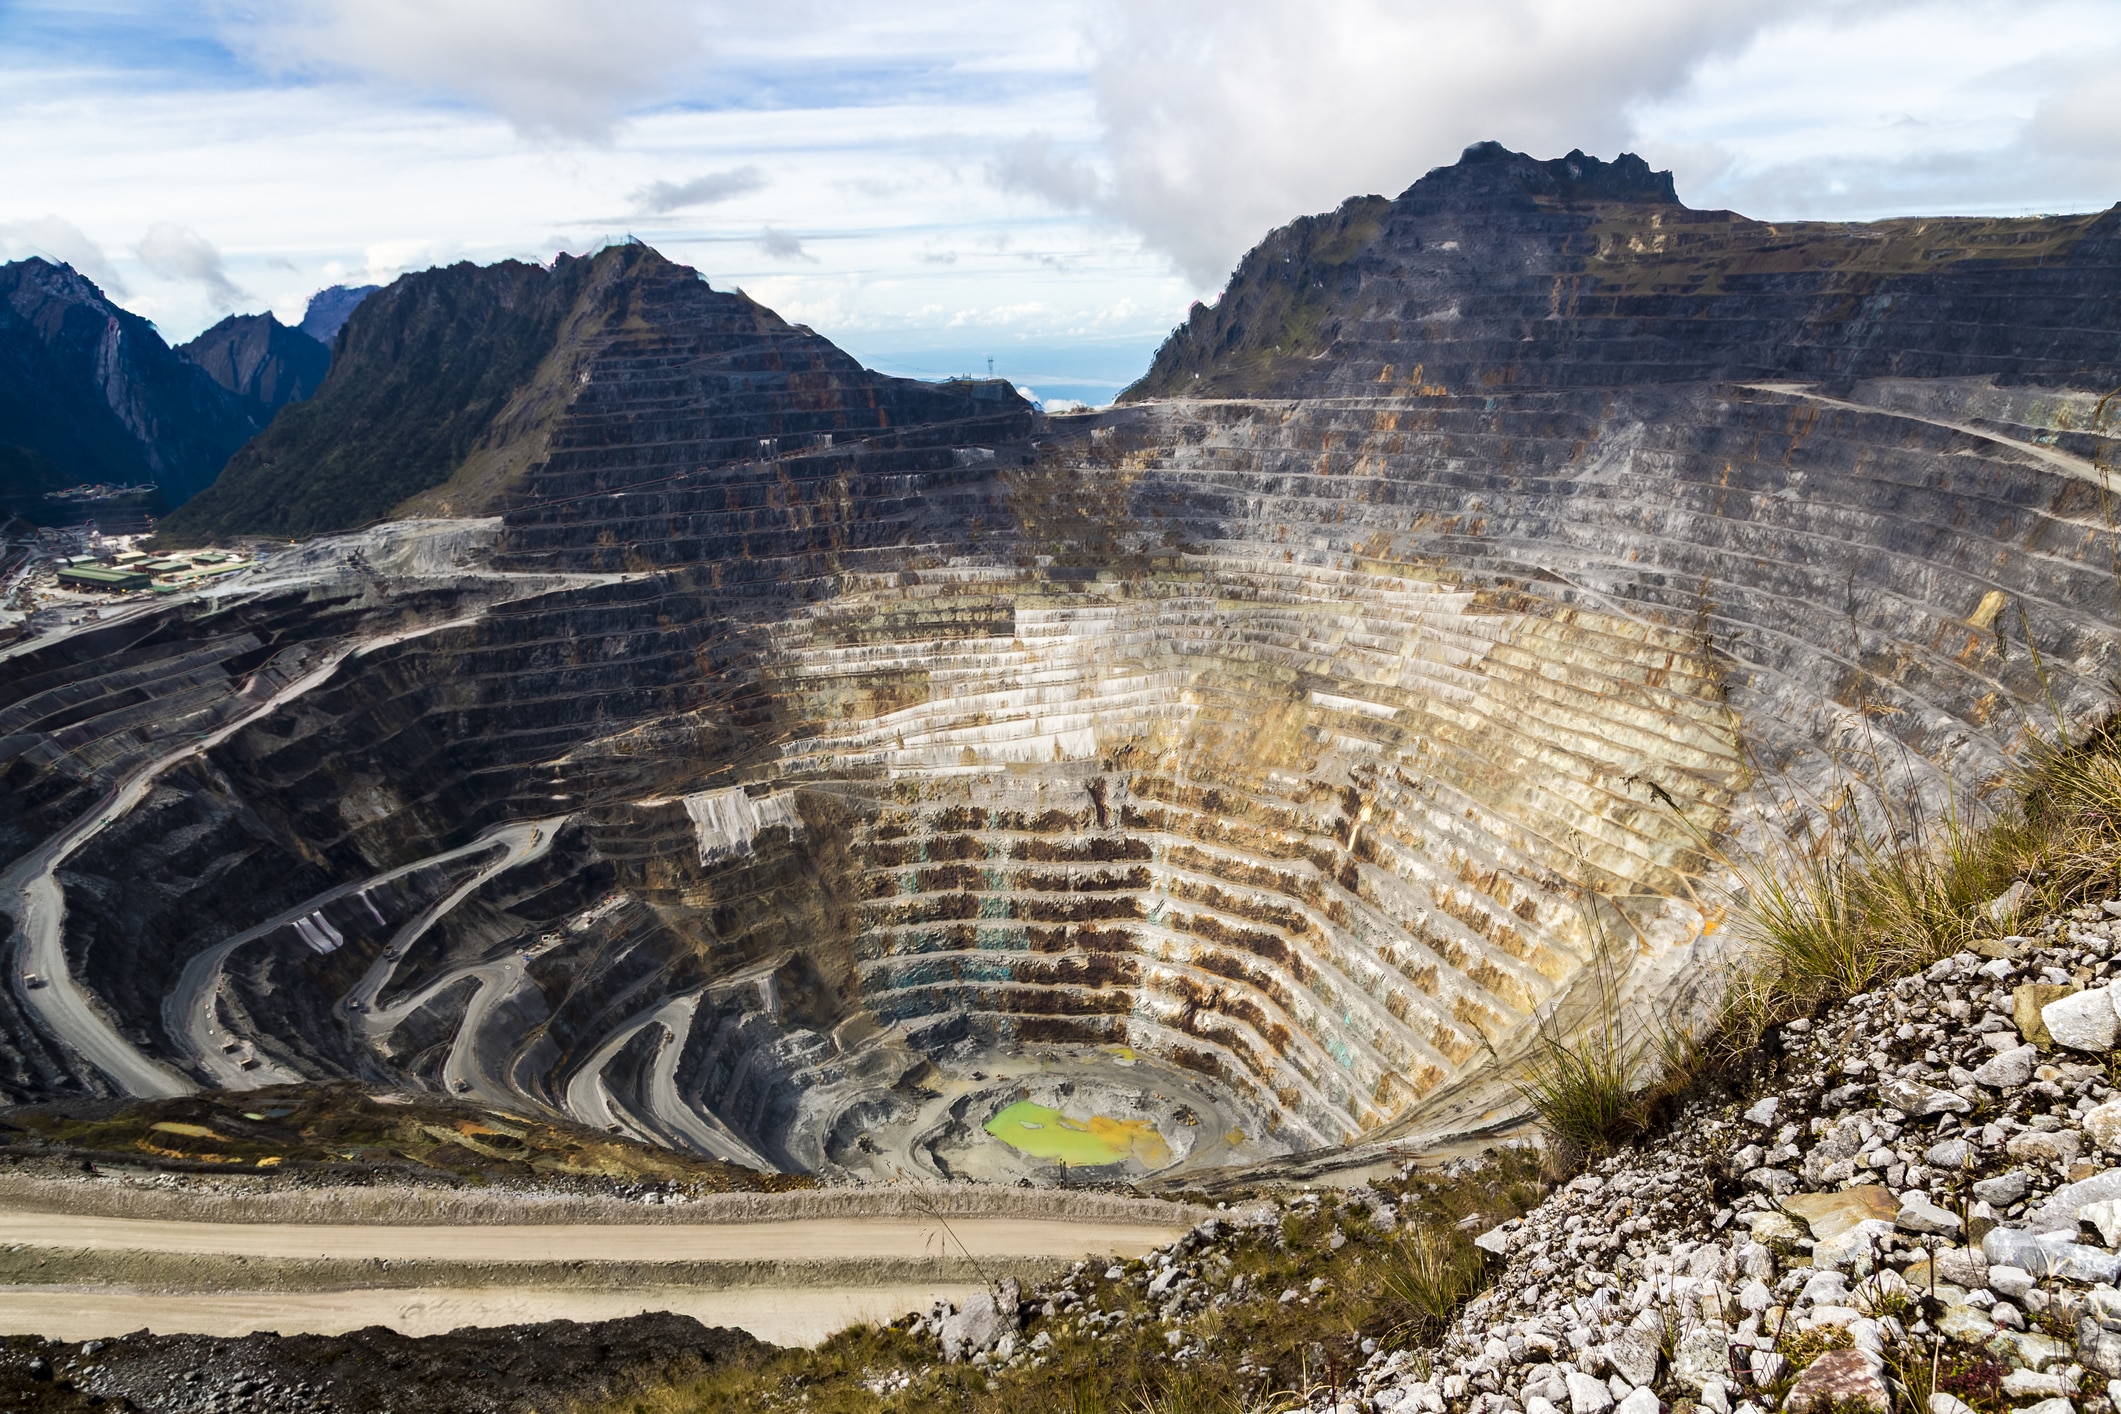 The canary in the rare earth–metals mine: Investors must decide whether green energy is having its day in the sun or becoming something more durable